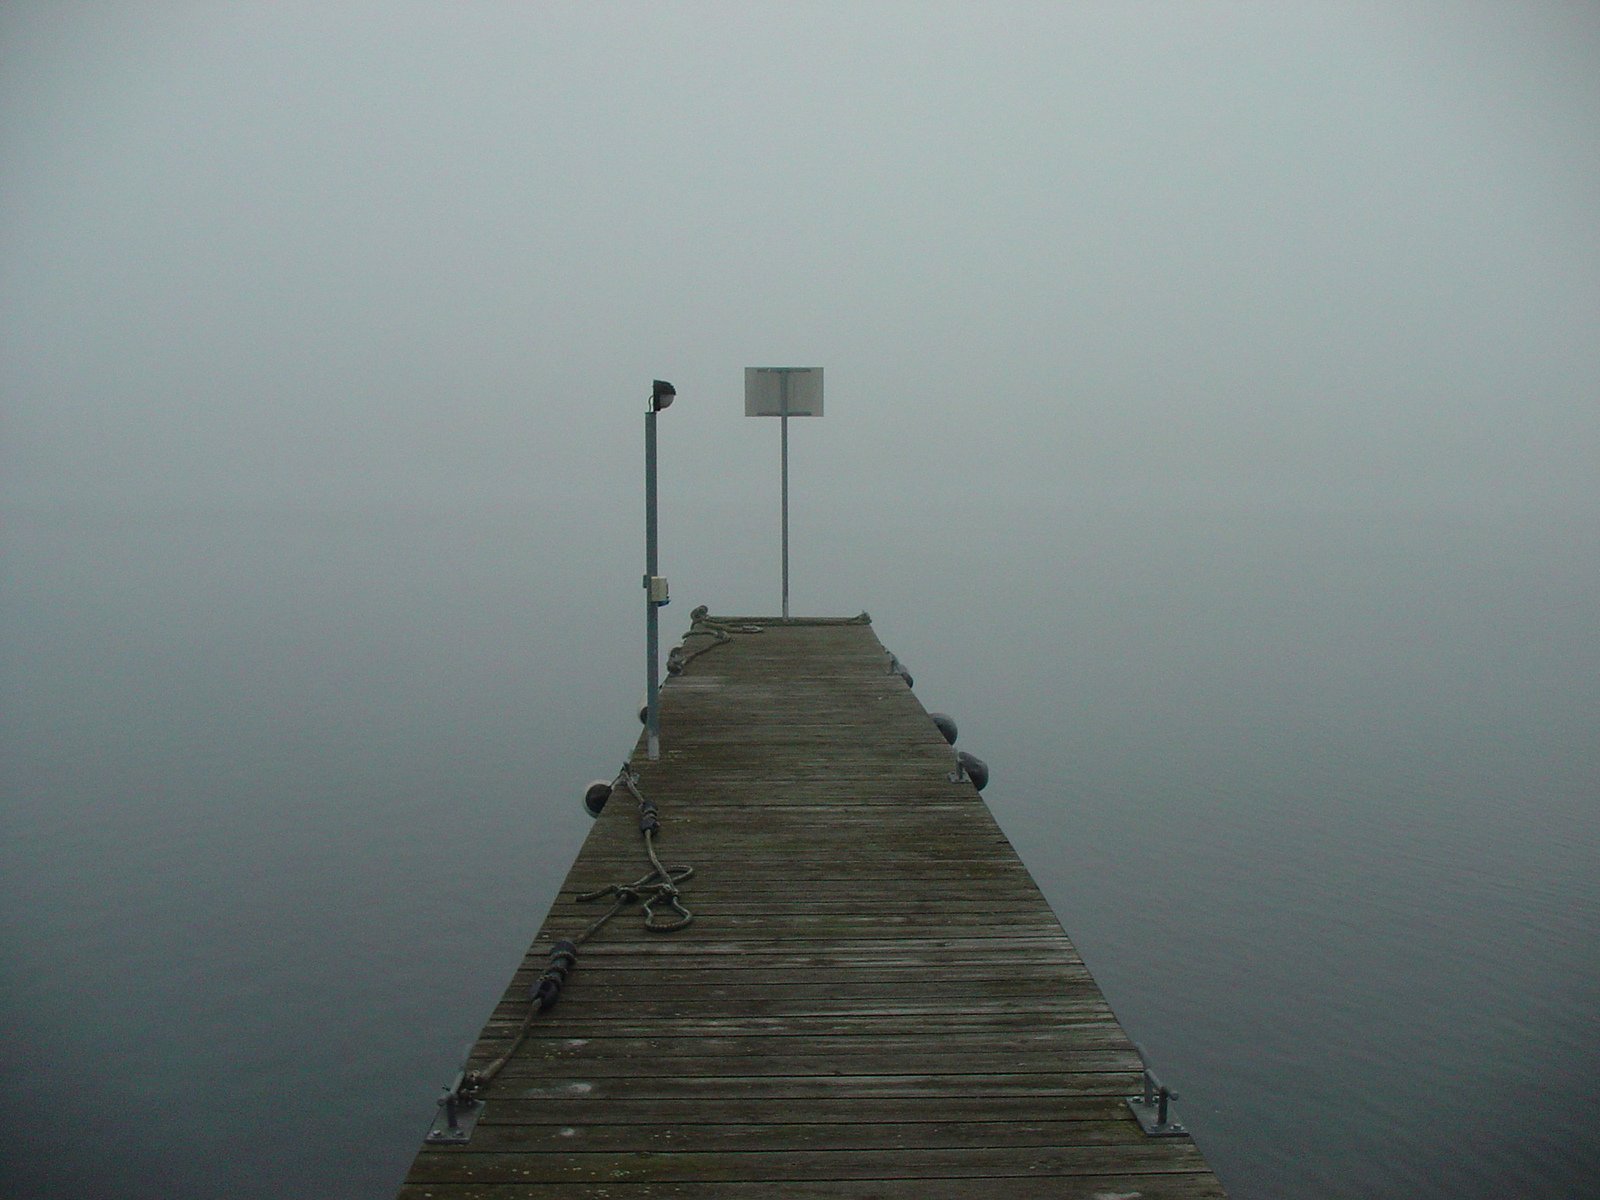 the end of the pier looks out onto the foggy water